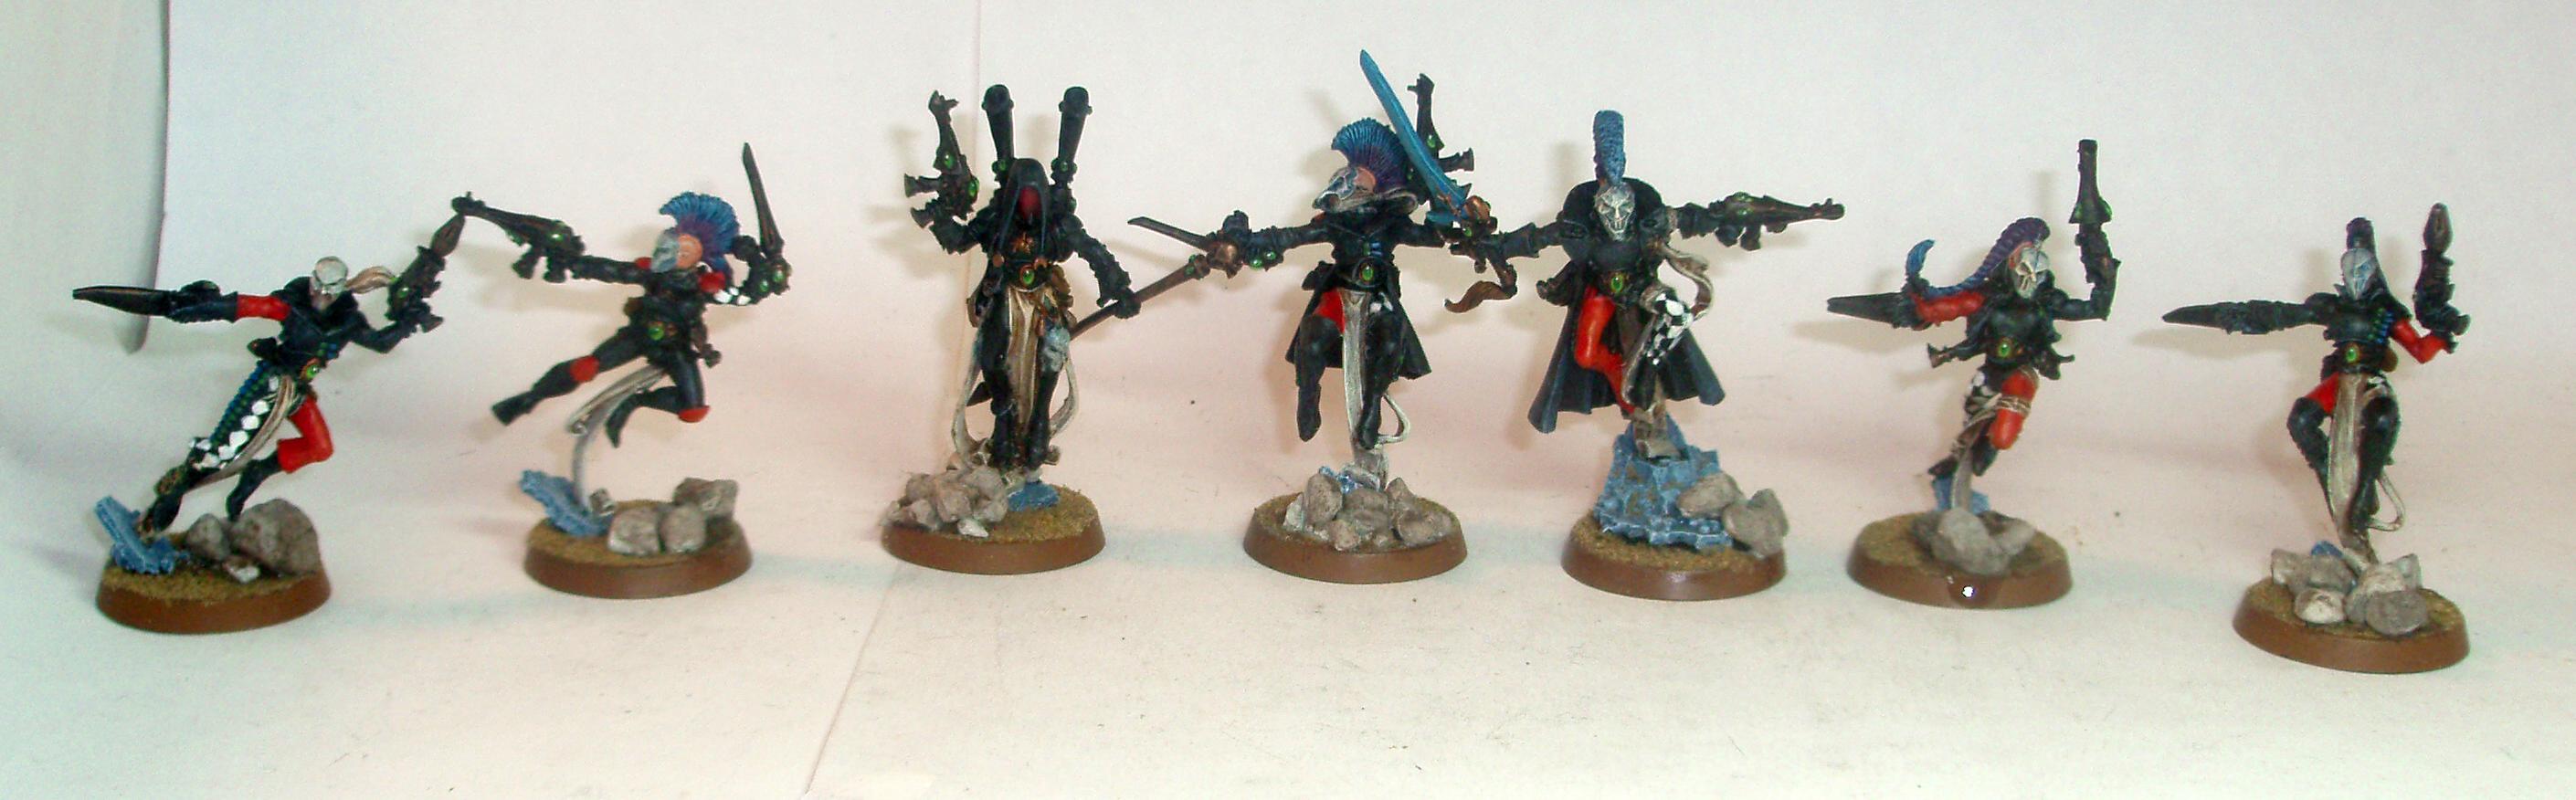 Bk Army Painting, Commission, Painting Service